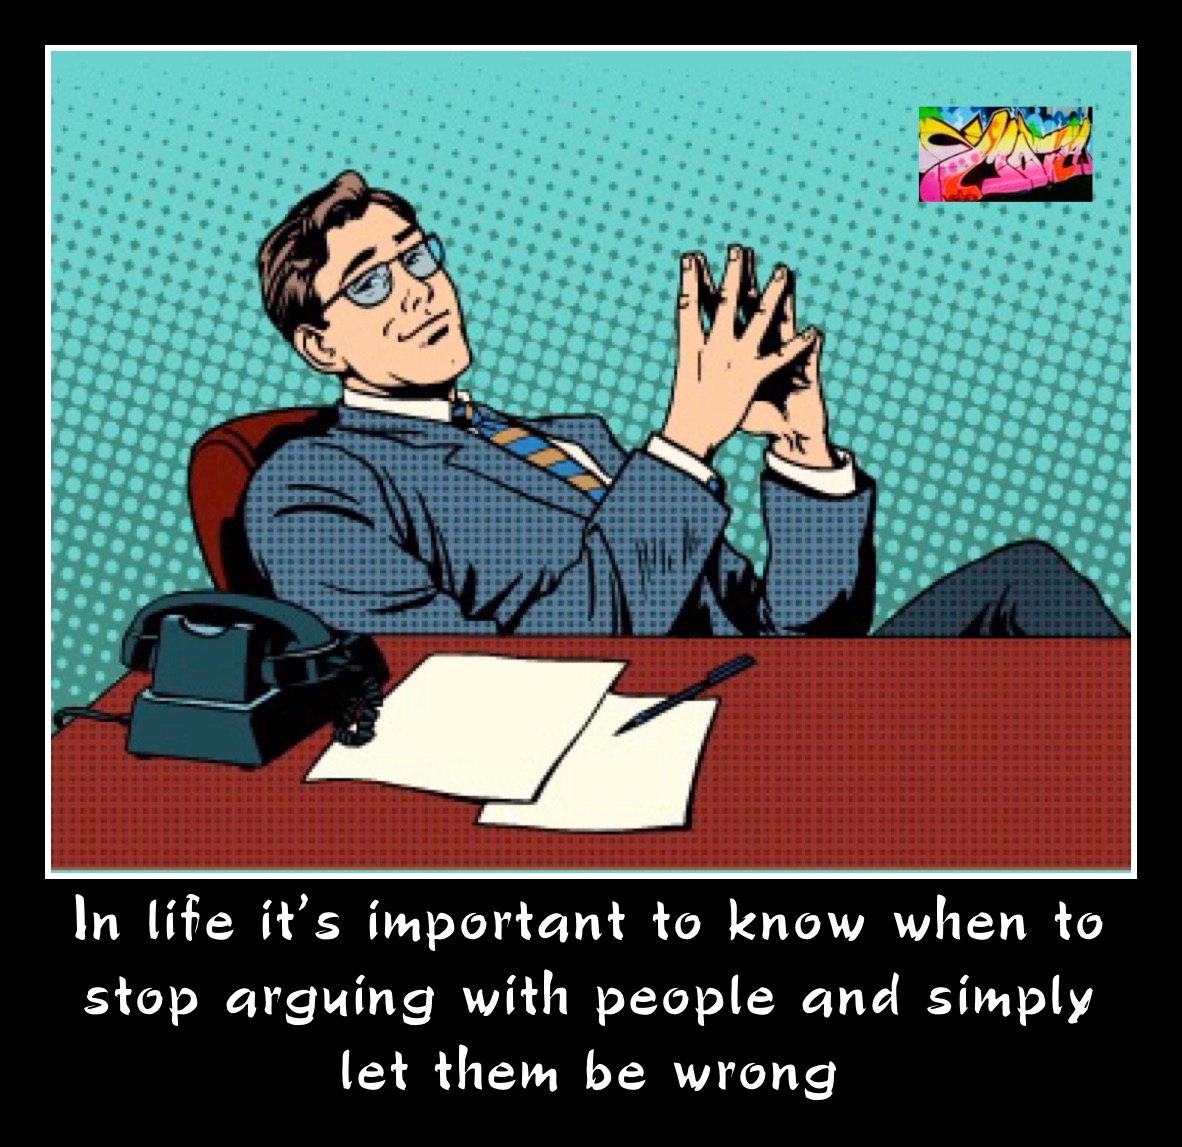 In life it’s important to know when to stop arguing with people and simply let them be wrong